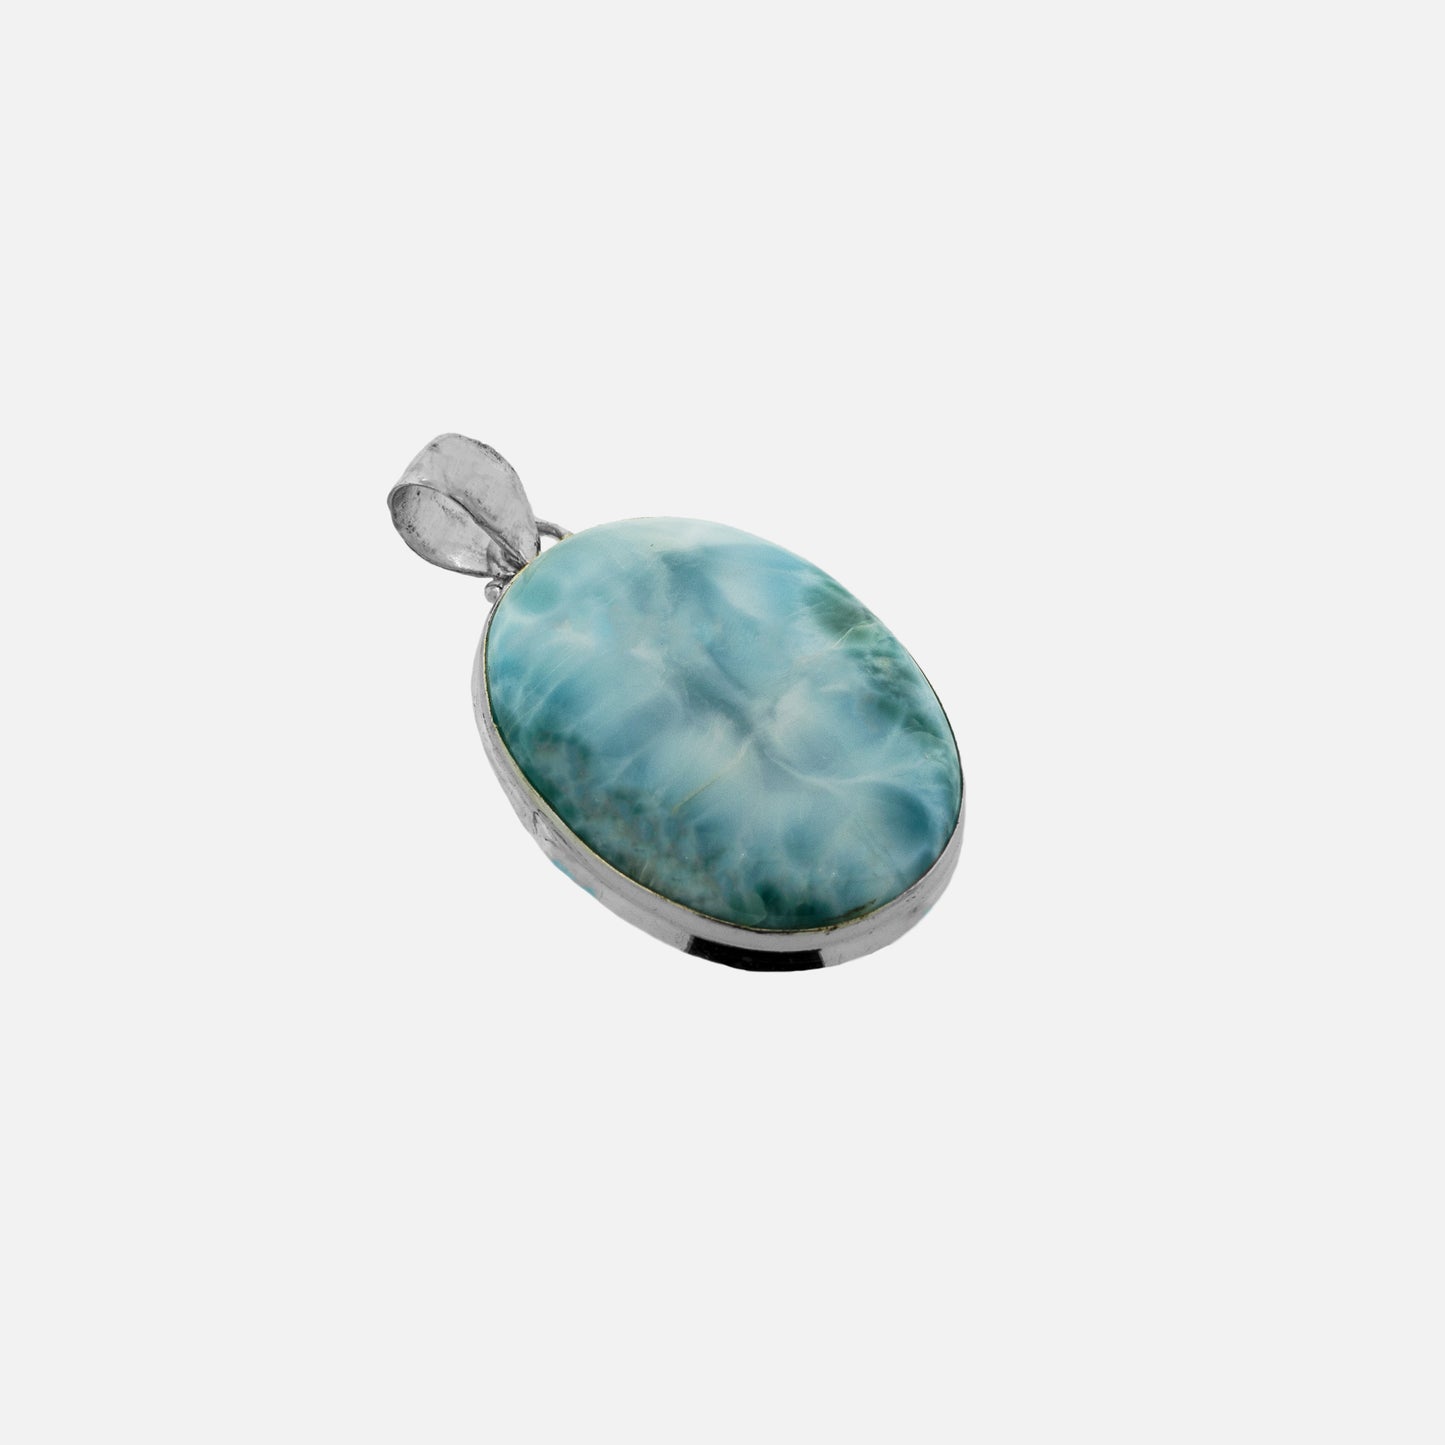 A Larger Oval Larimar Pendant with a sterling silver design on a white background by Super Silver.